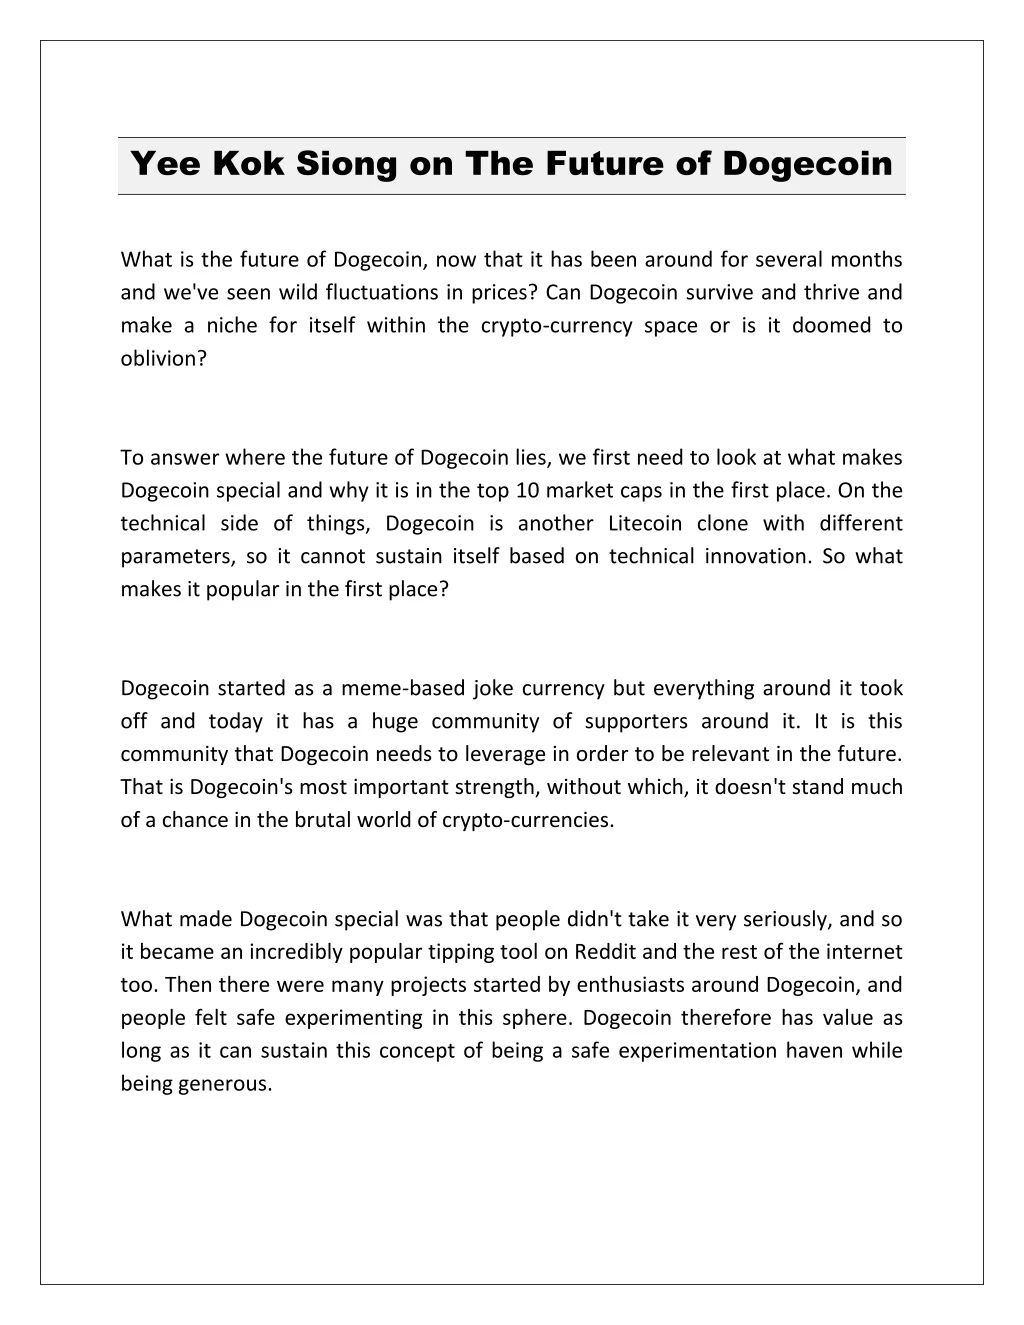 yee kok siong on the future of dogecoin